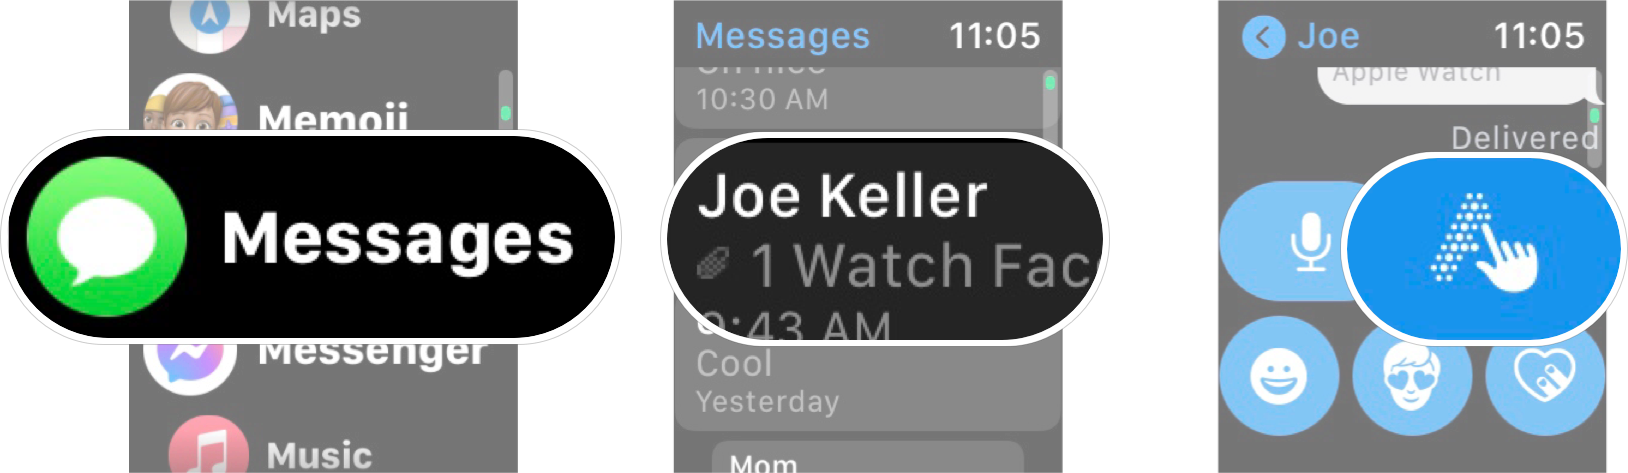 Send Emoji With Scribble On Apple Watch: Launch an app you can write in, select the conversation your want, and then tap the Scribble button.